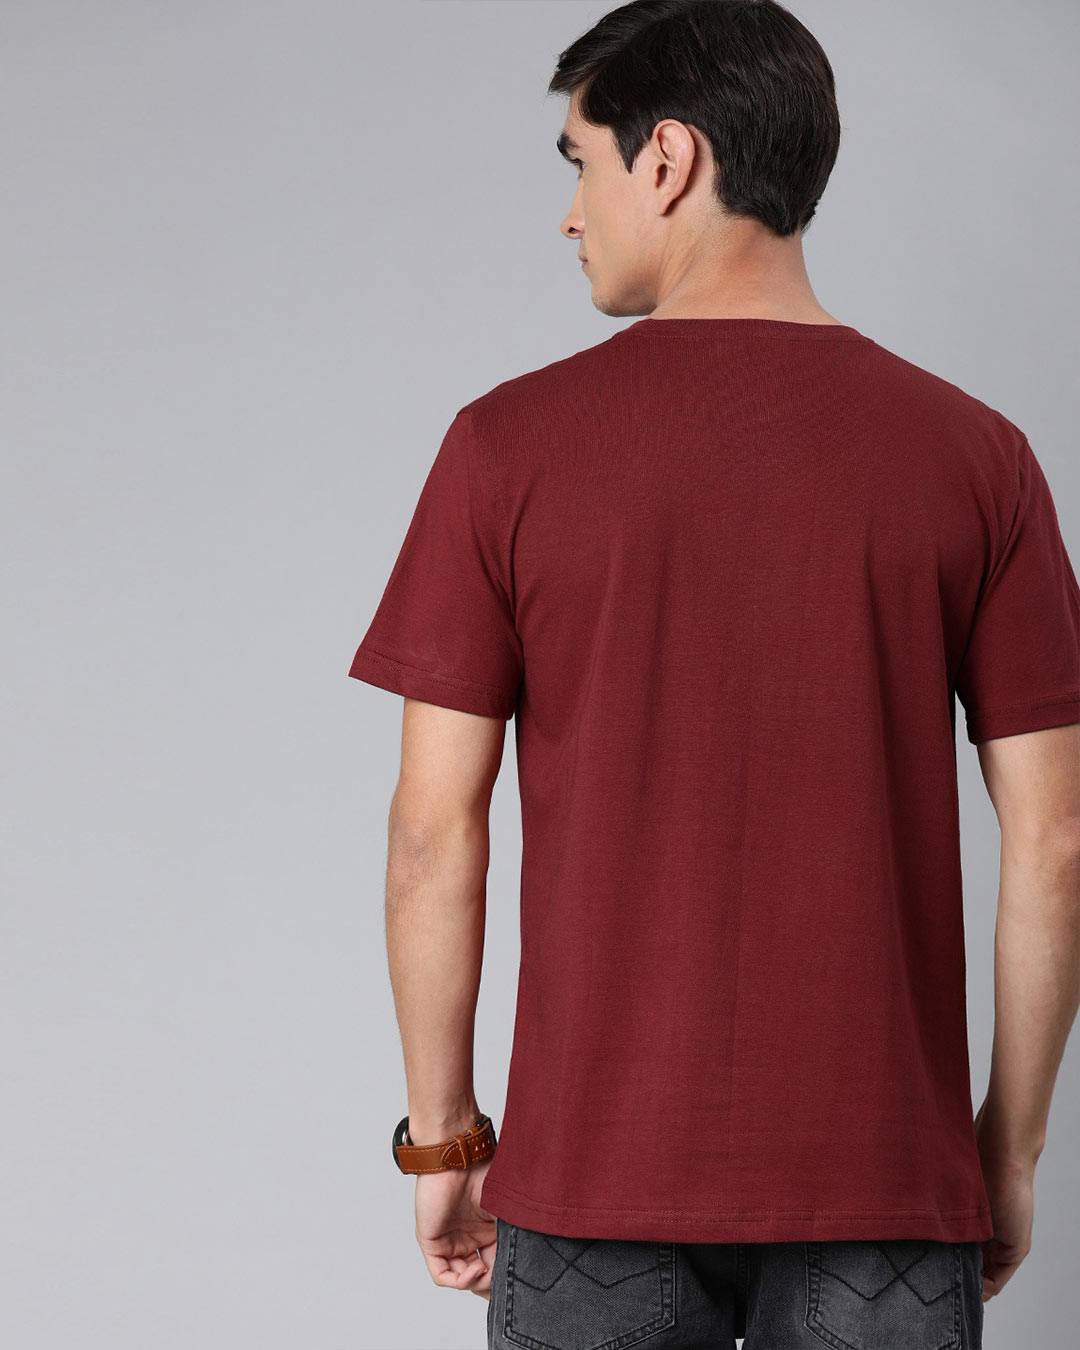 Shop Perfectly Imperfect Half Sleeve T-shirt For Men's-Back